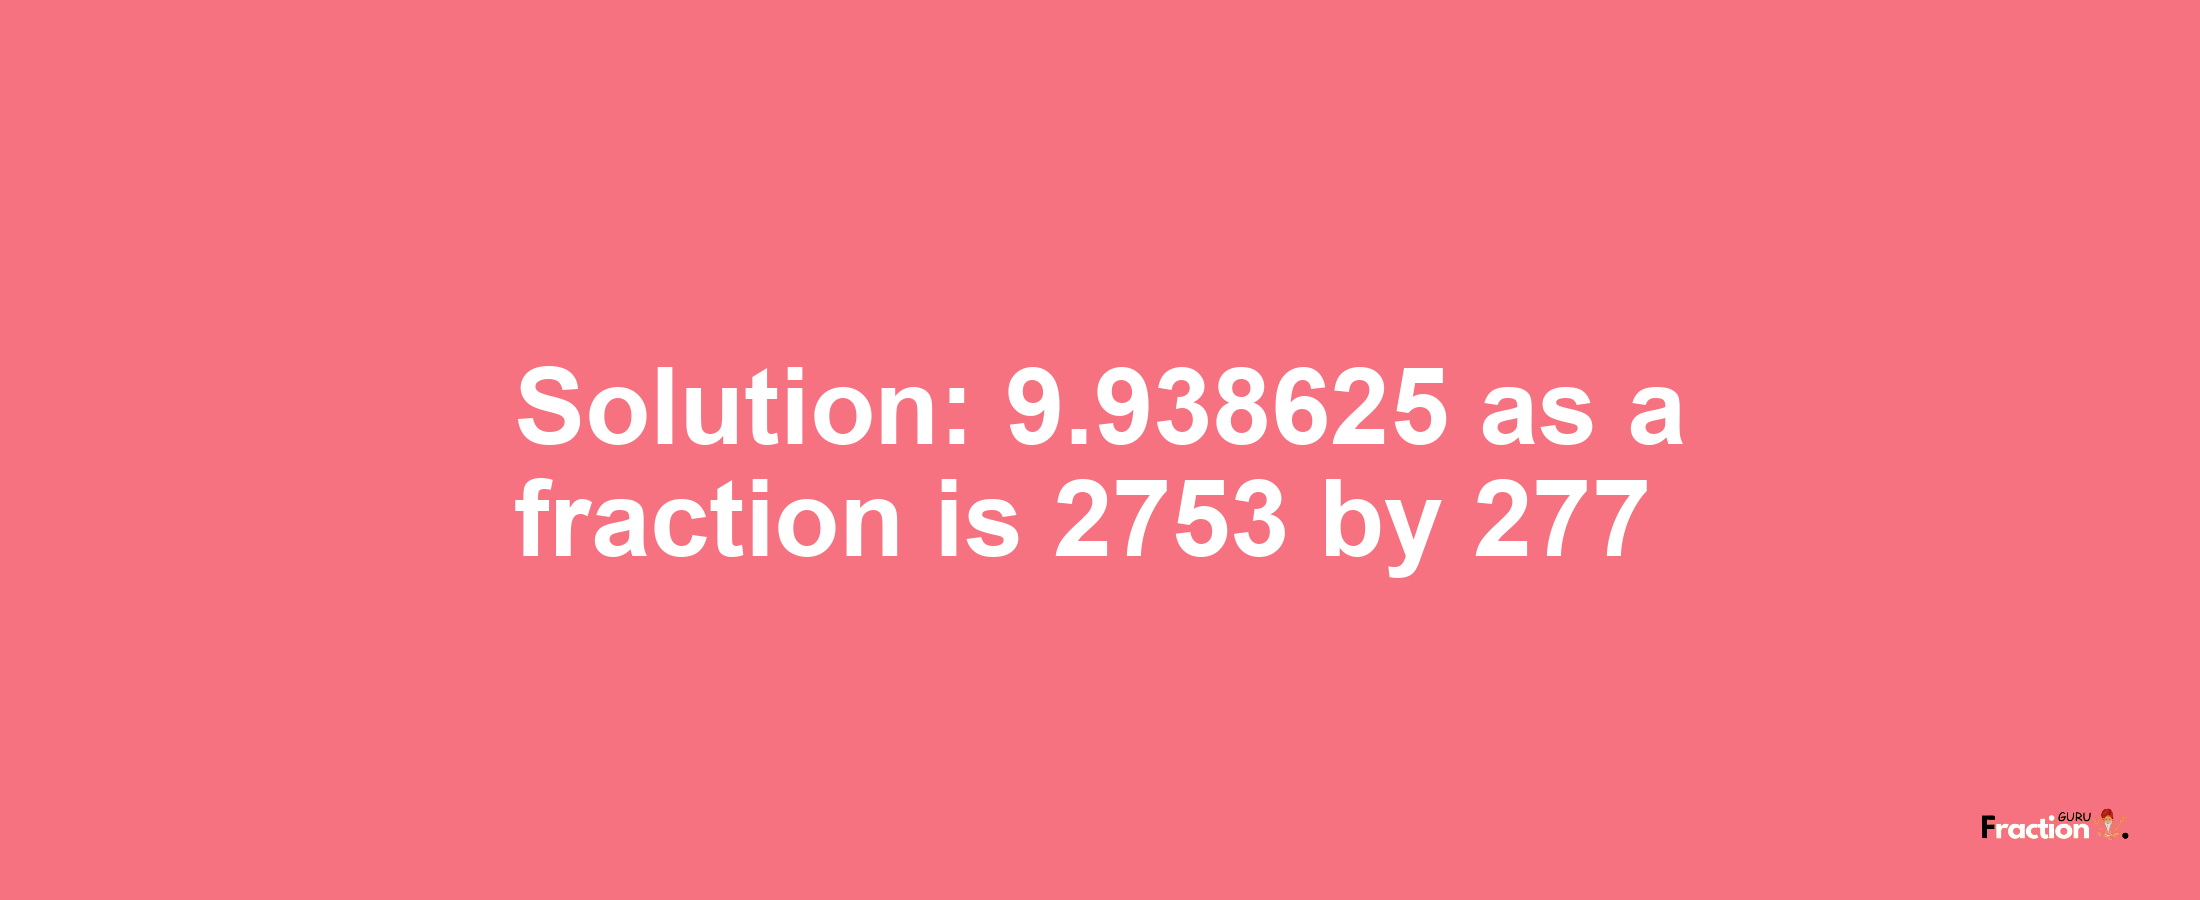 Solution:9.938625 as a fraction is 2753/277